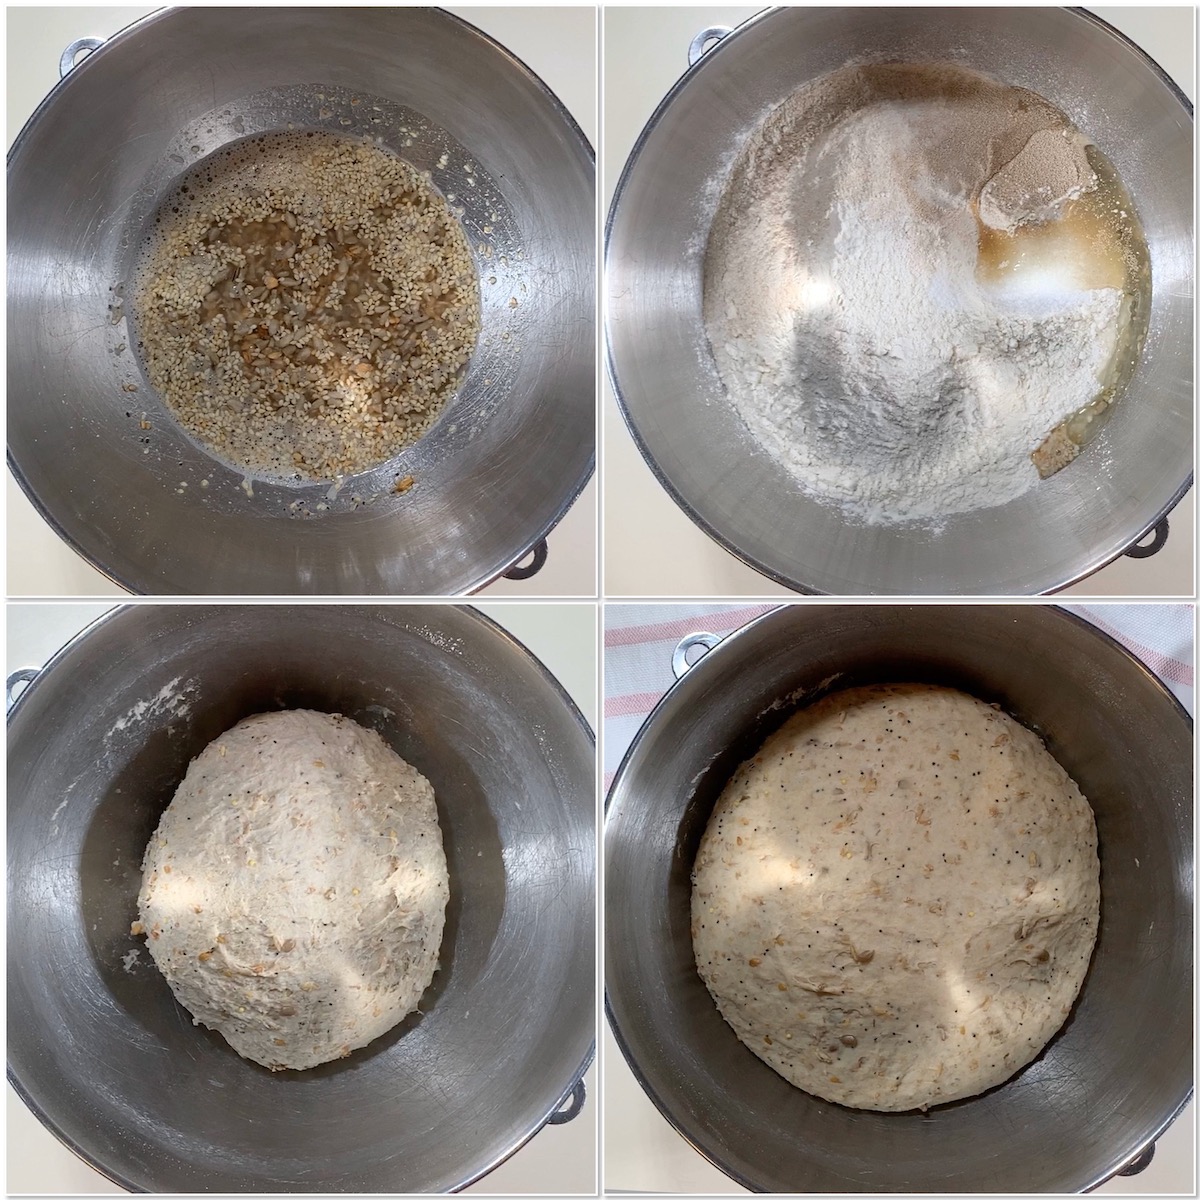 Making dough and before and after rising multigrain sourdough bread collage